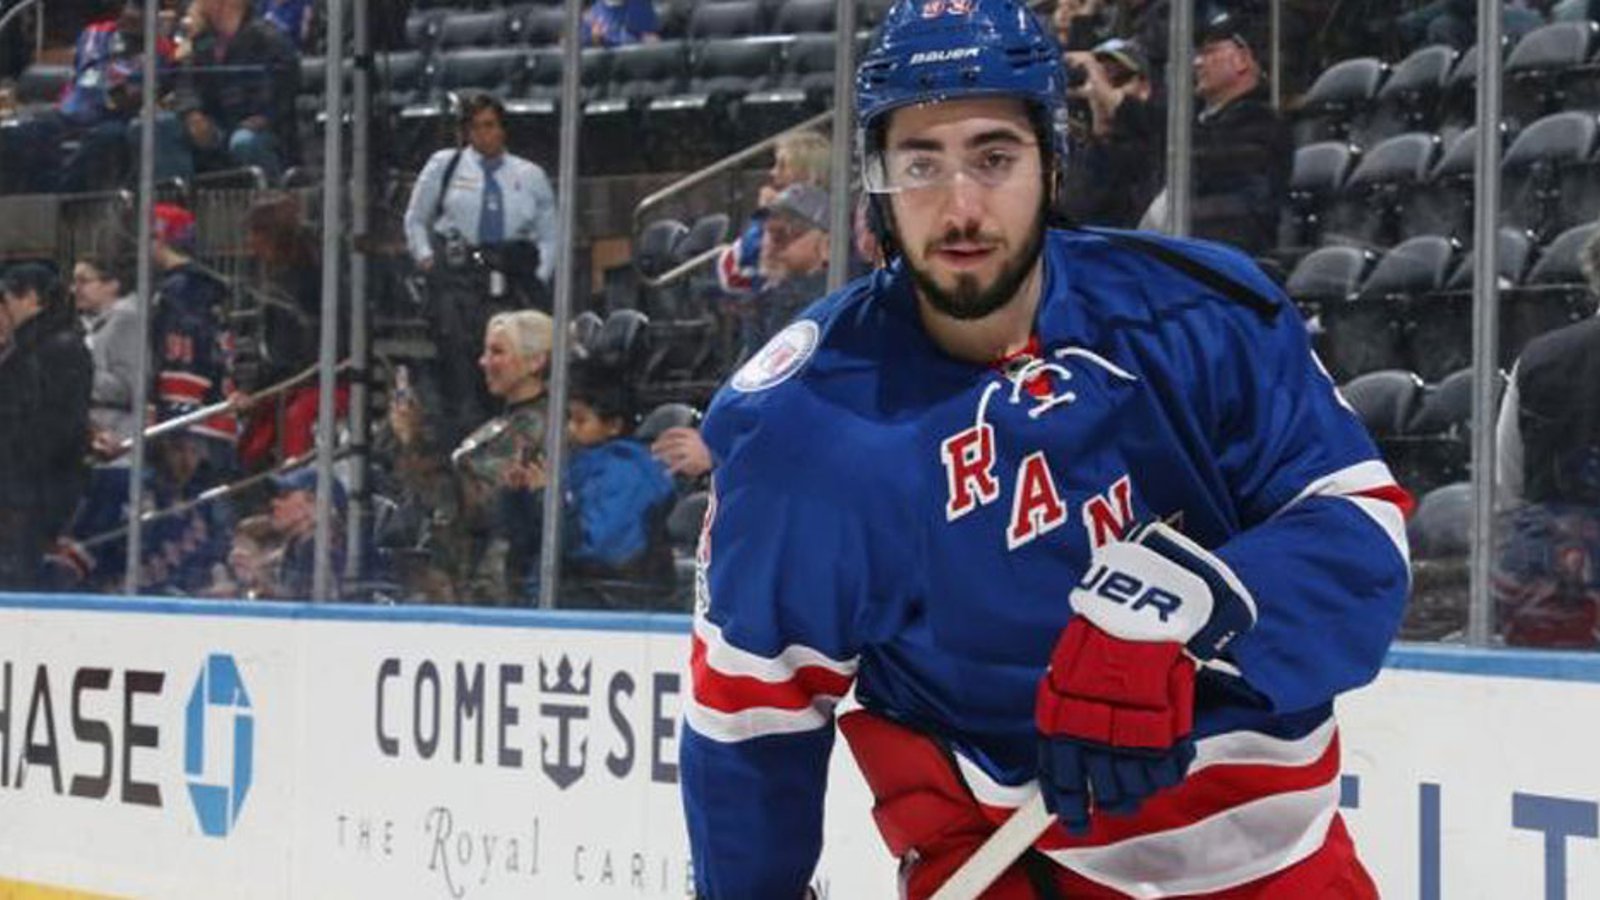 Breaking: the worst is confirmed for Zibanejad and the Rangers! 